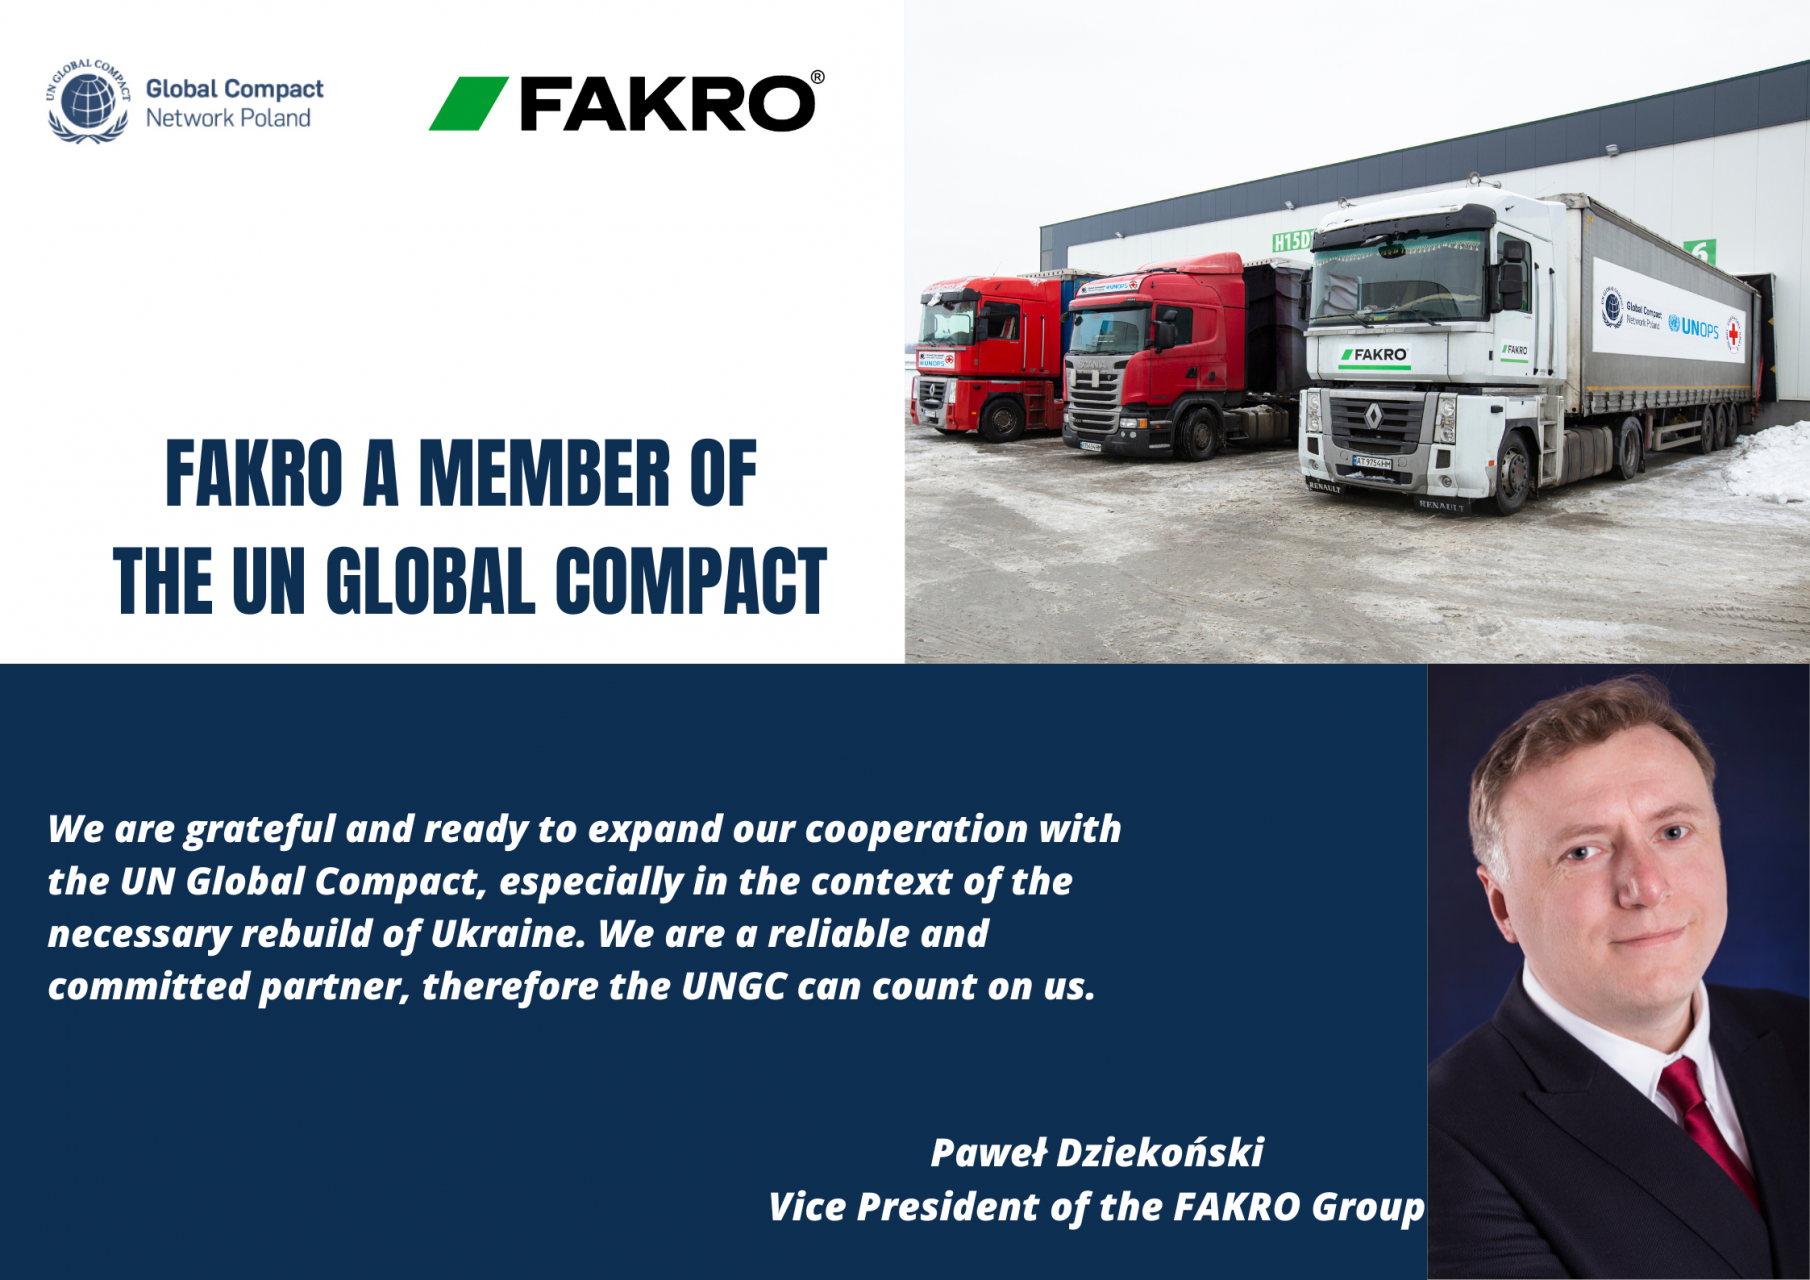 FAKRO becoming a member of the UN Global Compact